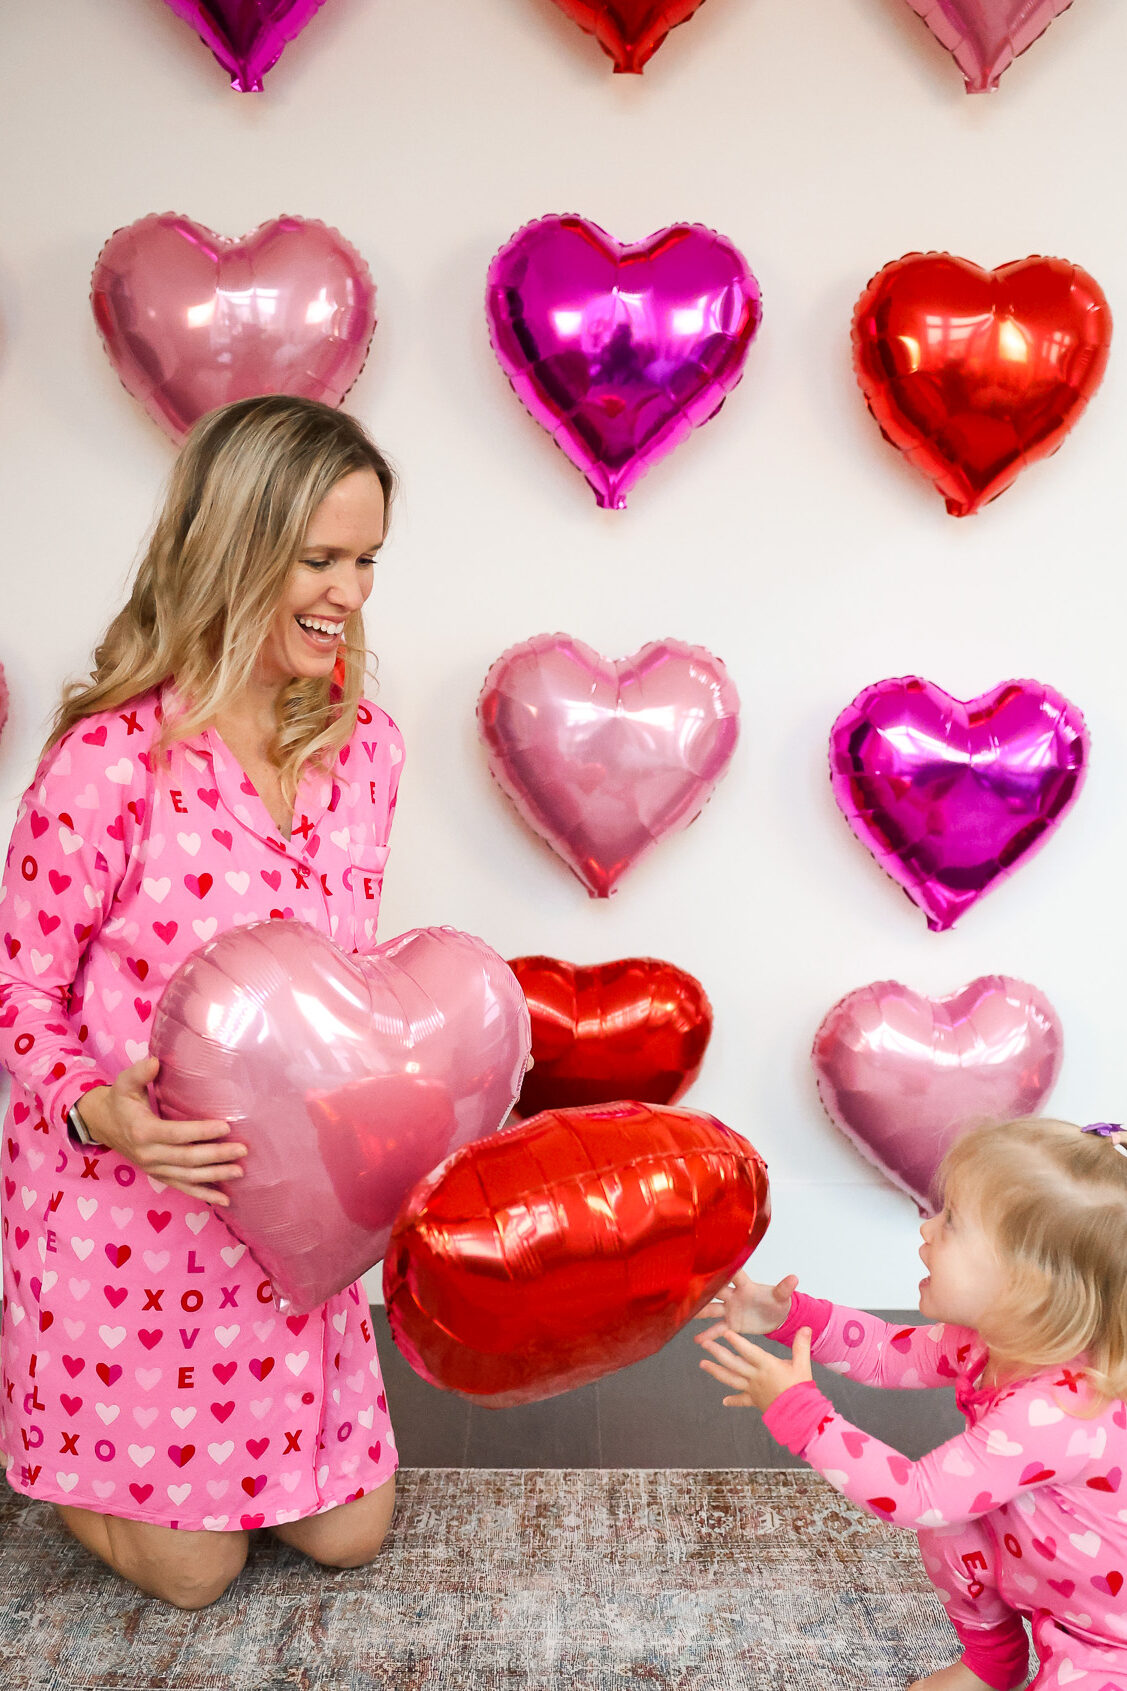 DIY family photos for Valentine's Day